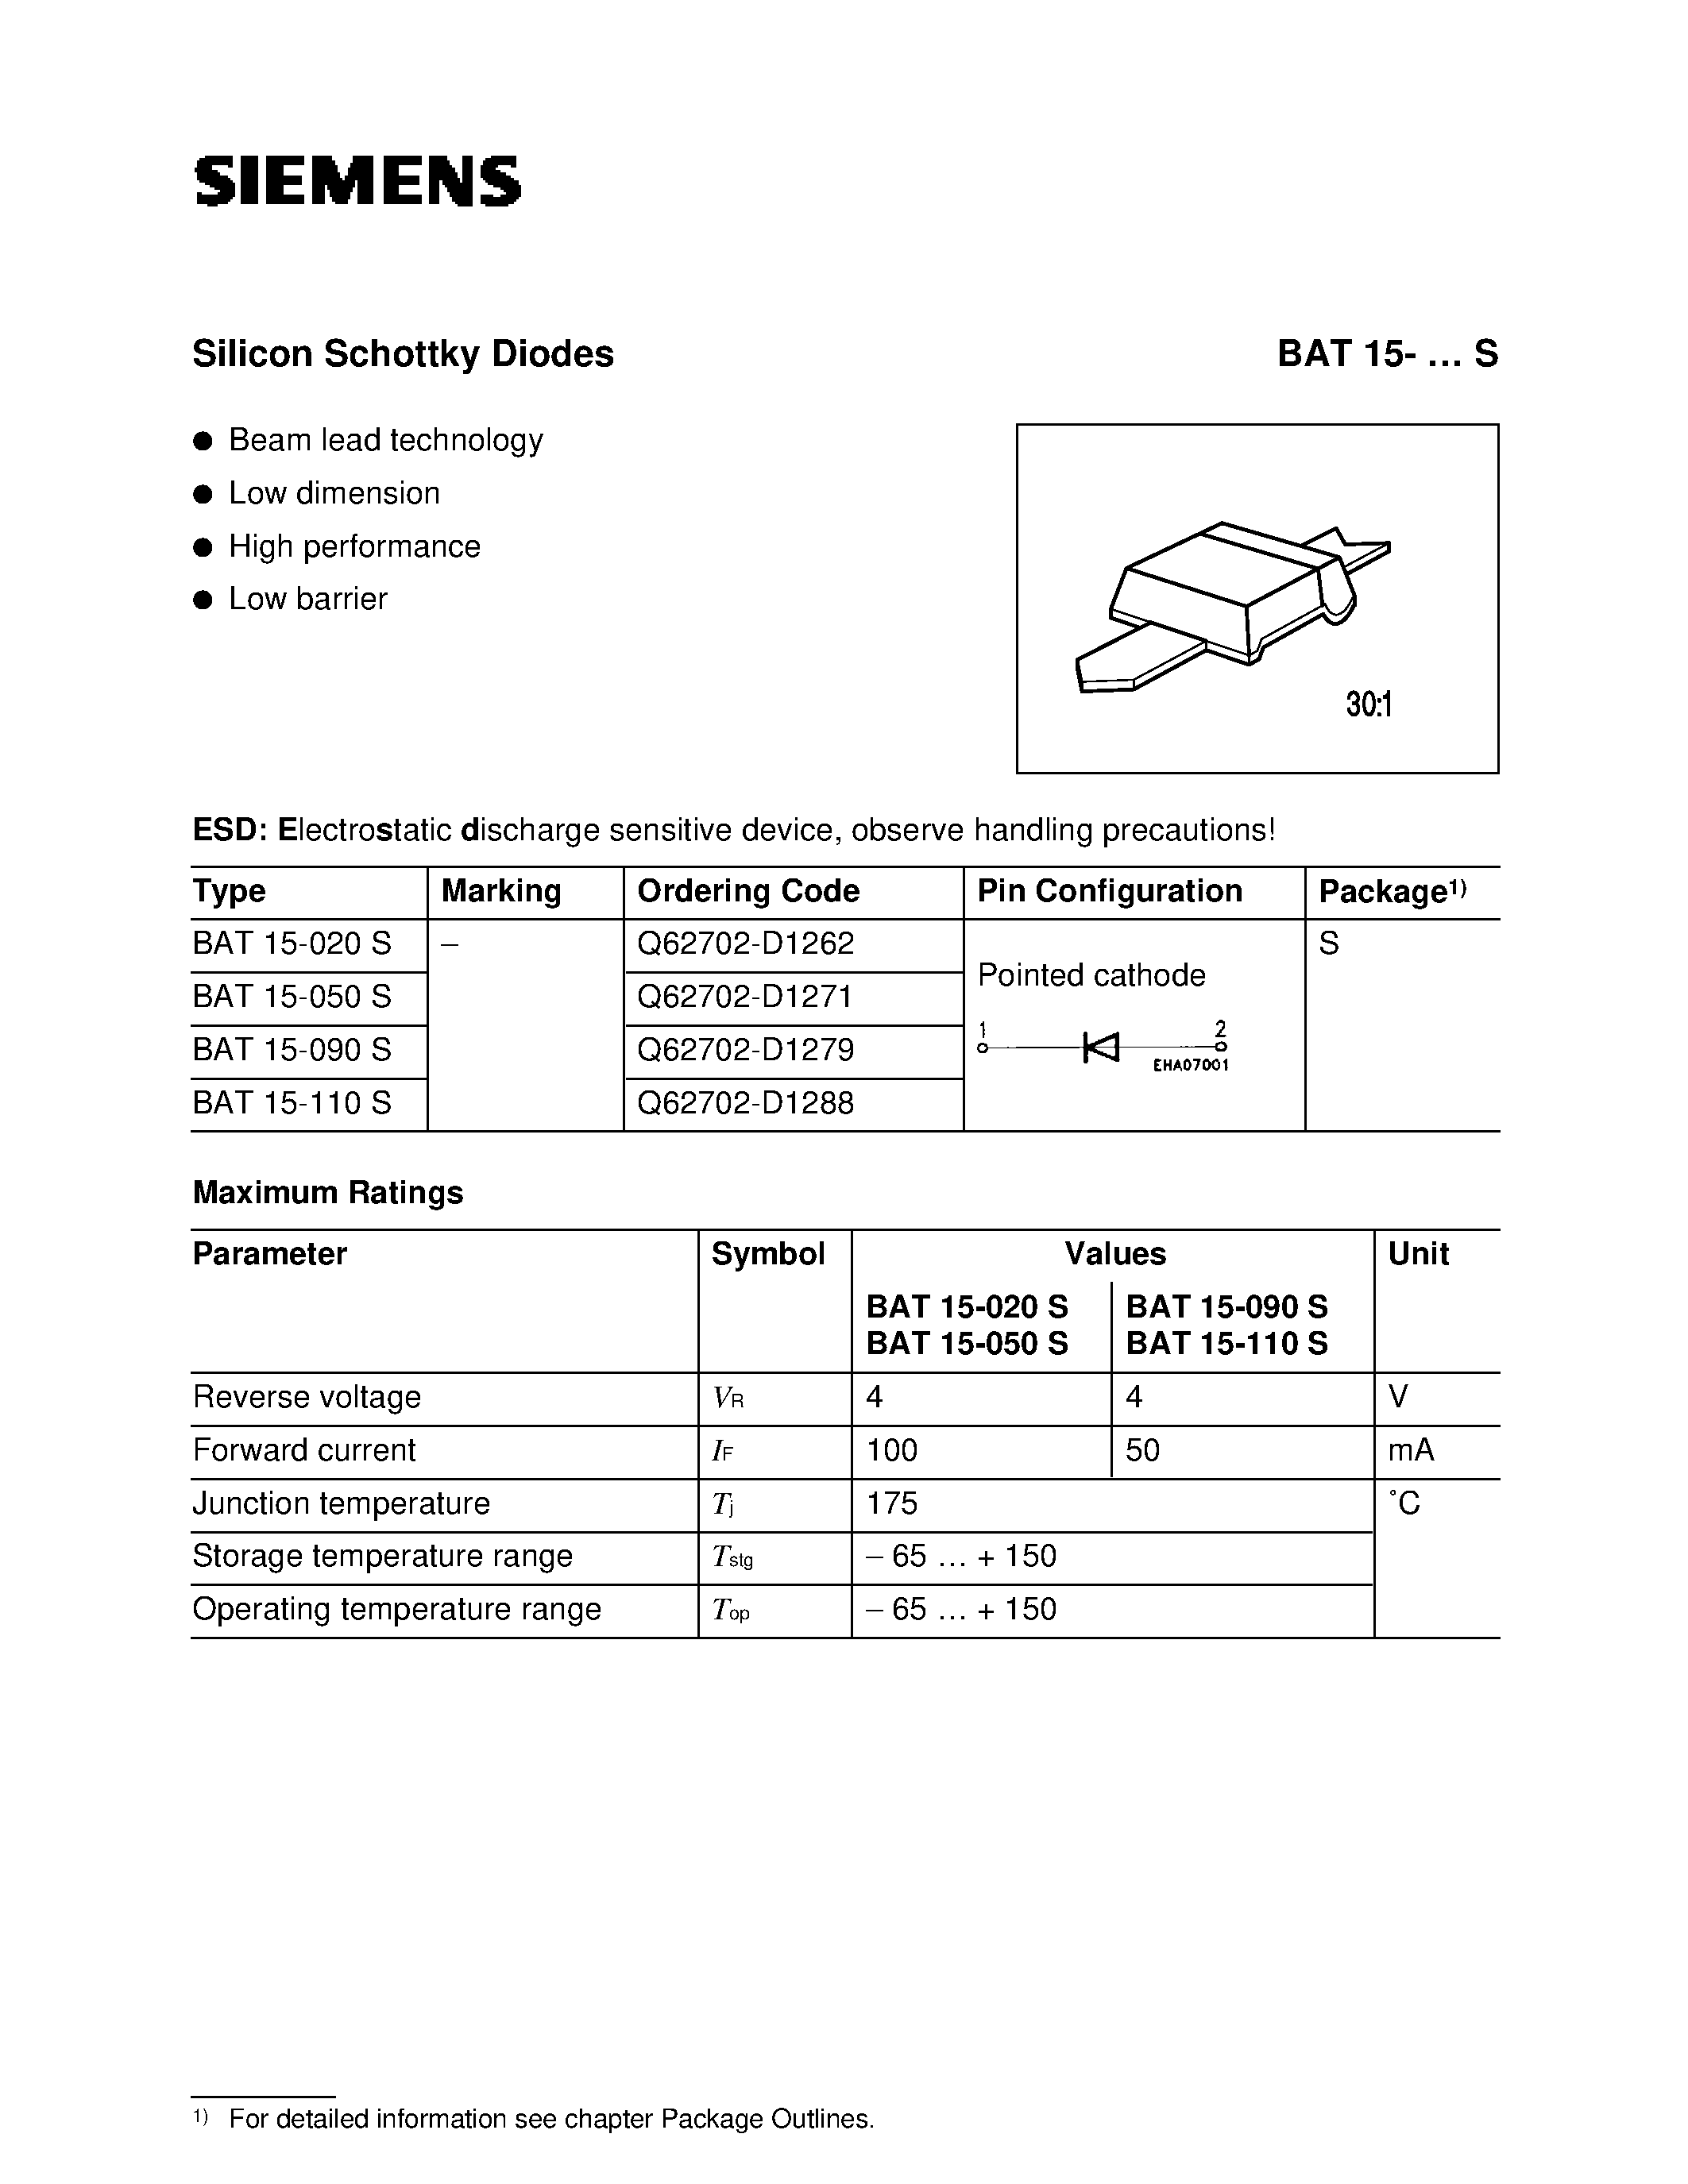 Datasheet BAT15-050S - Silicon Schottky Diodes (Beam lead technology Low dimension High performance Low barrier) page 1